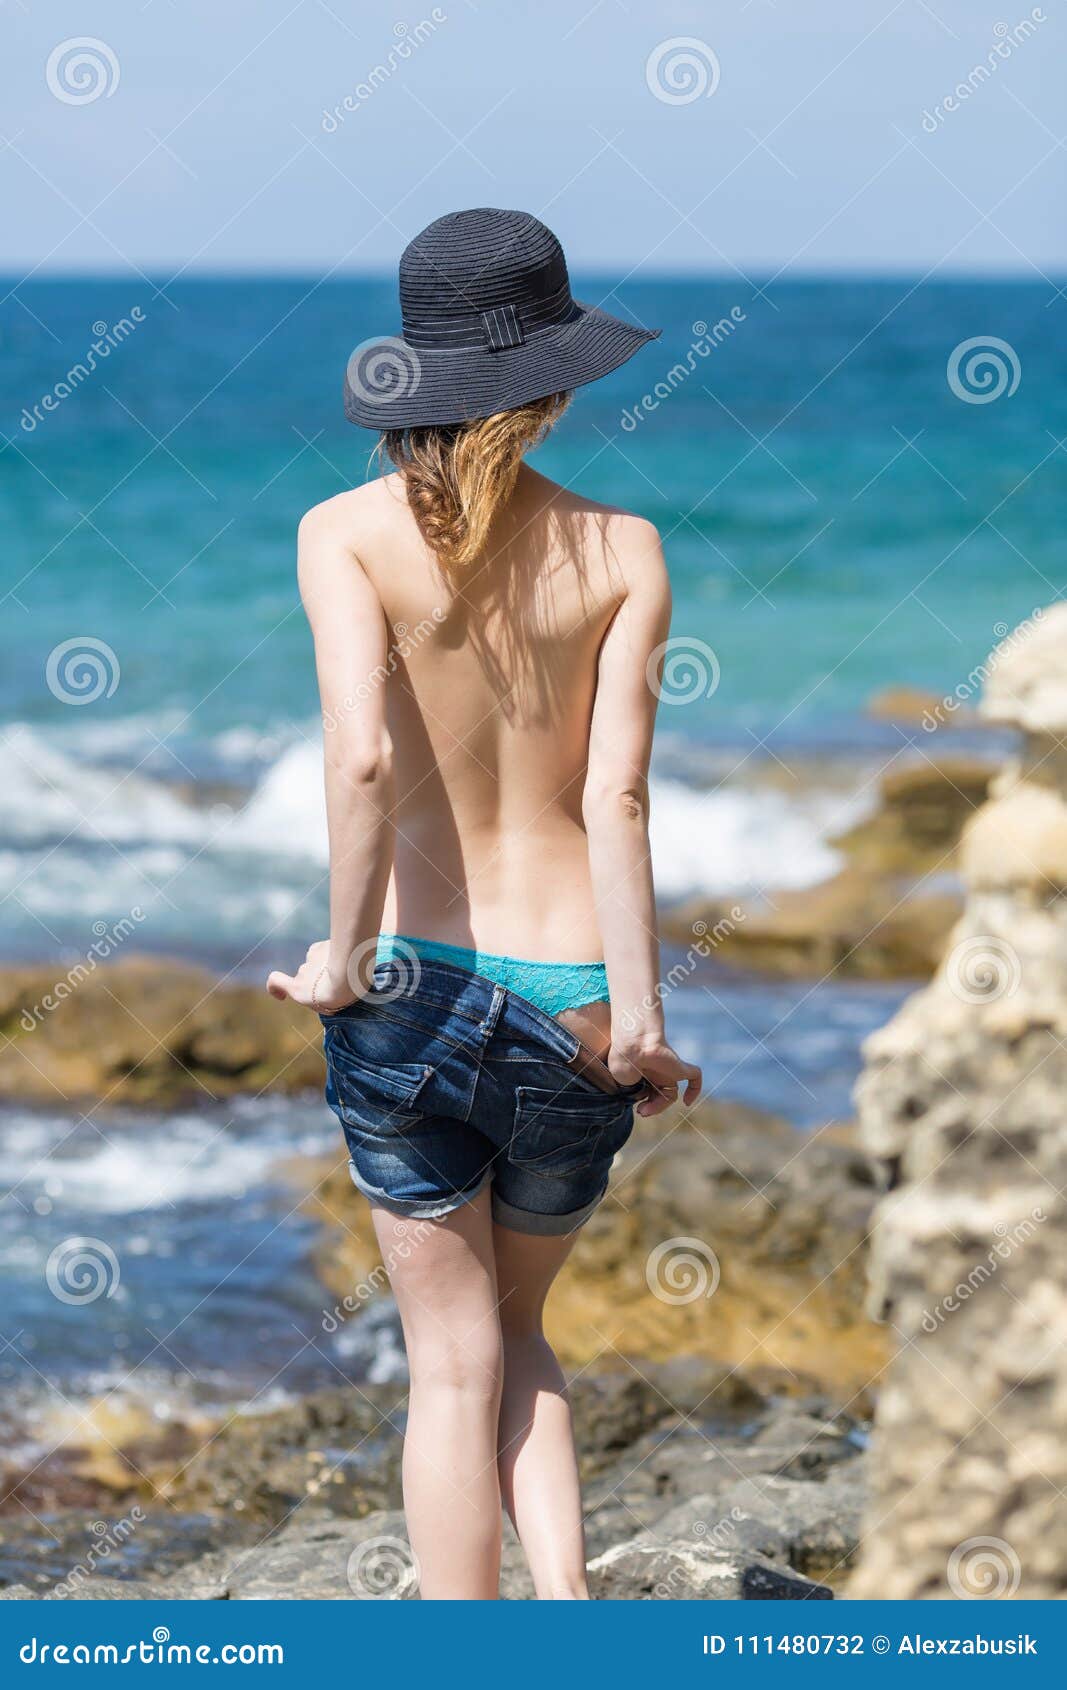 Girls indressing at nude beach Young Woman In Hat And Shorts Undressing On Seashore Stock Photo Image Of Rear Jeans 111480732